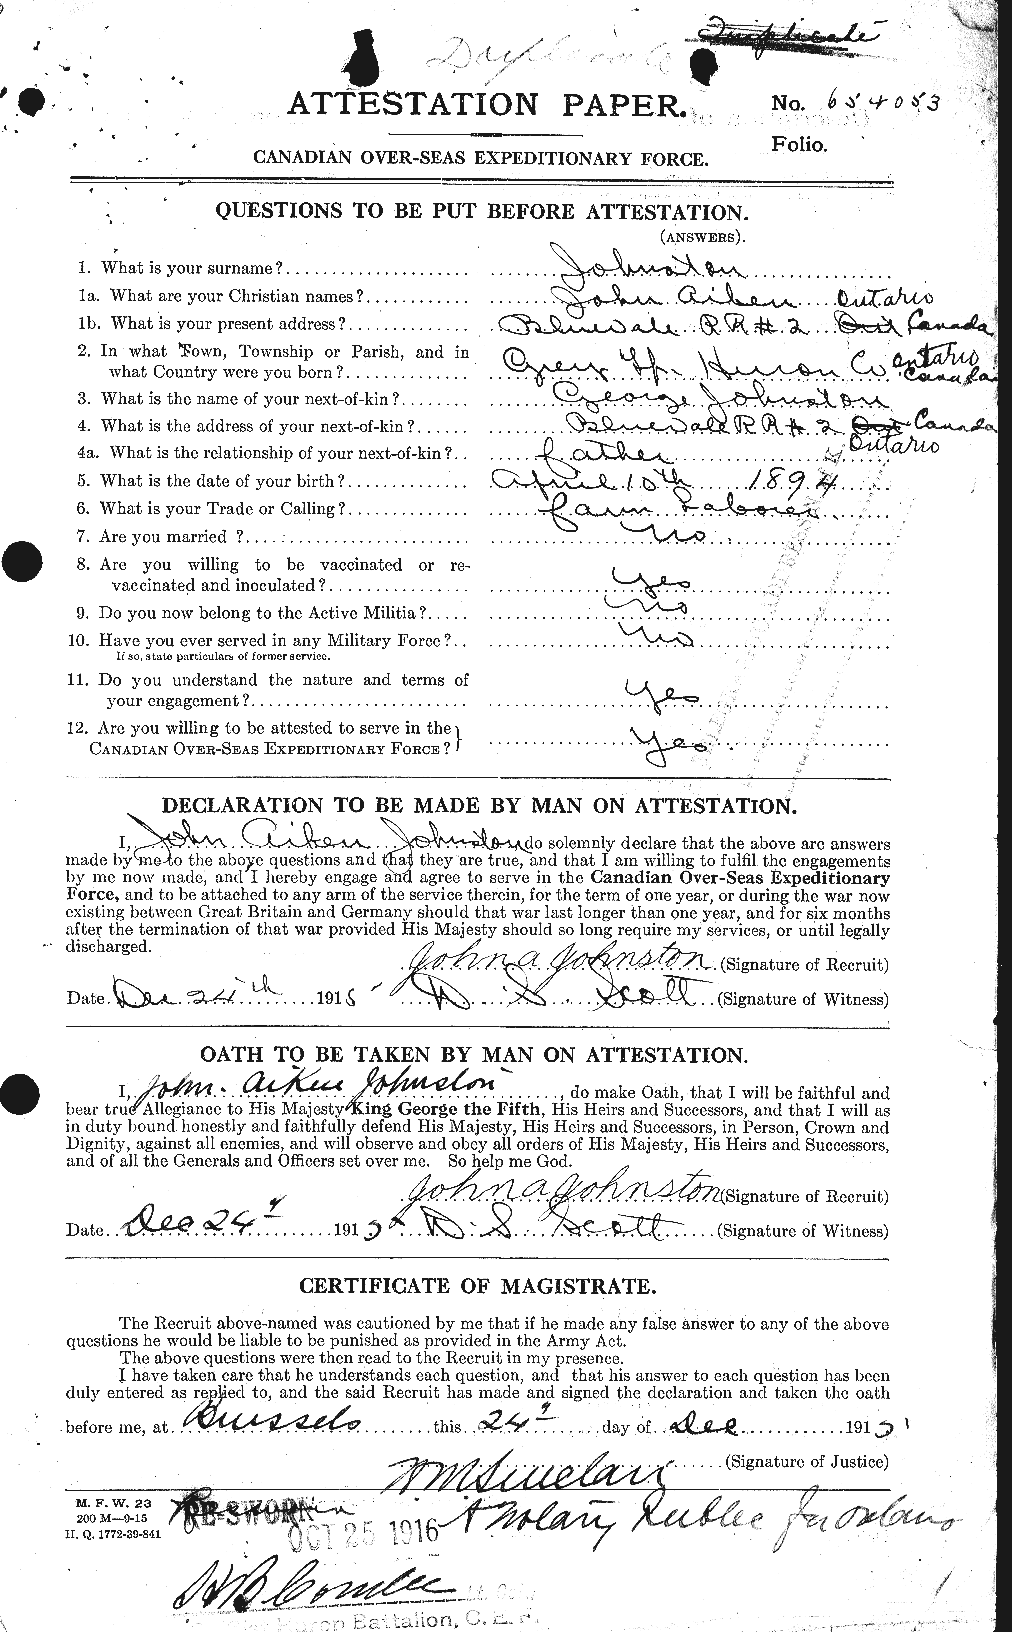 Personnel Records of the First World War - CEF 422805a